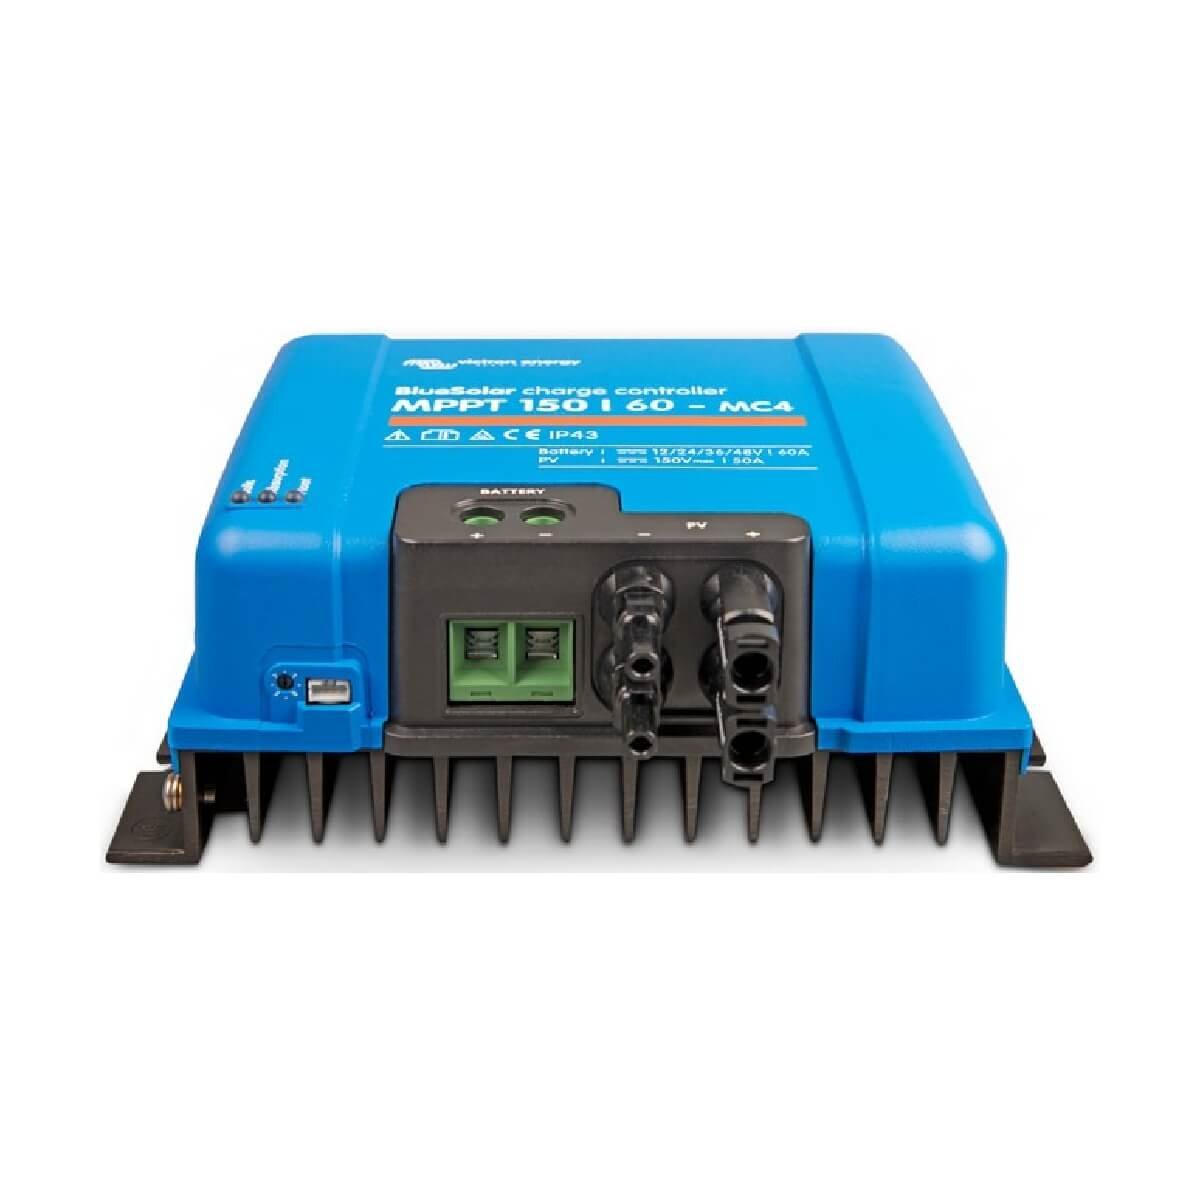 The Victron MPPT 150/60 - BlueSolar Charge Controller - MC4 features multiple connectors, including MC4, and information labels on the front.